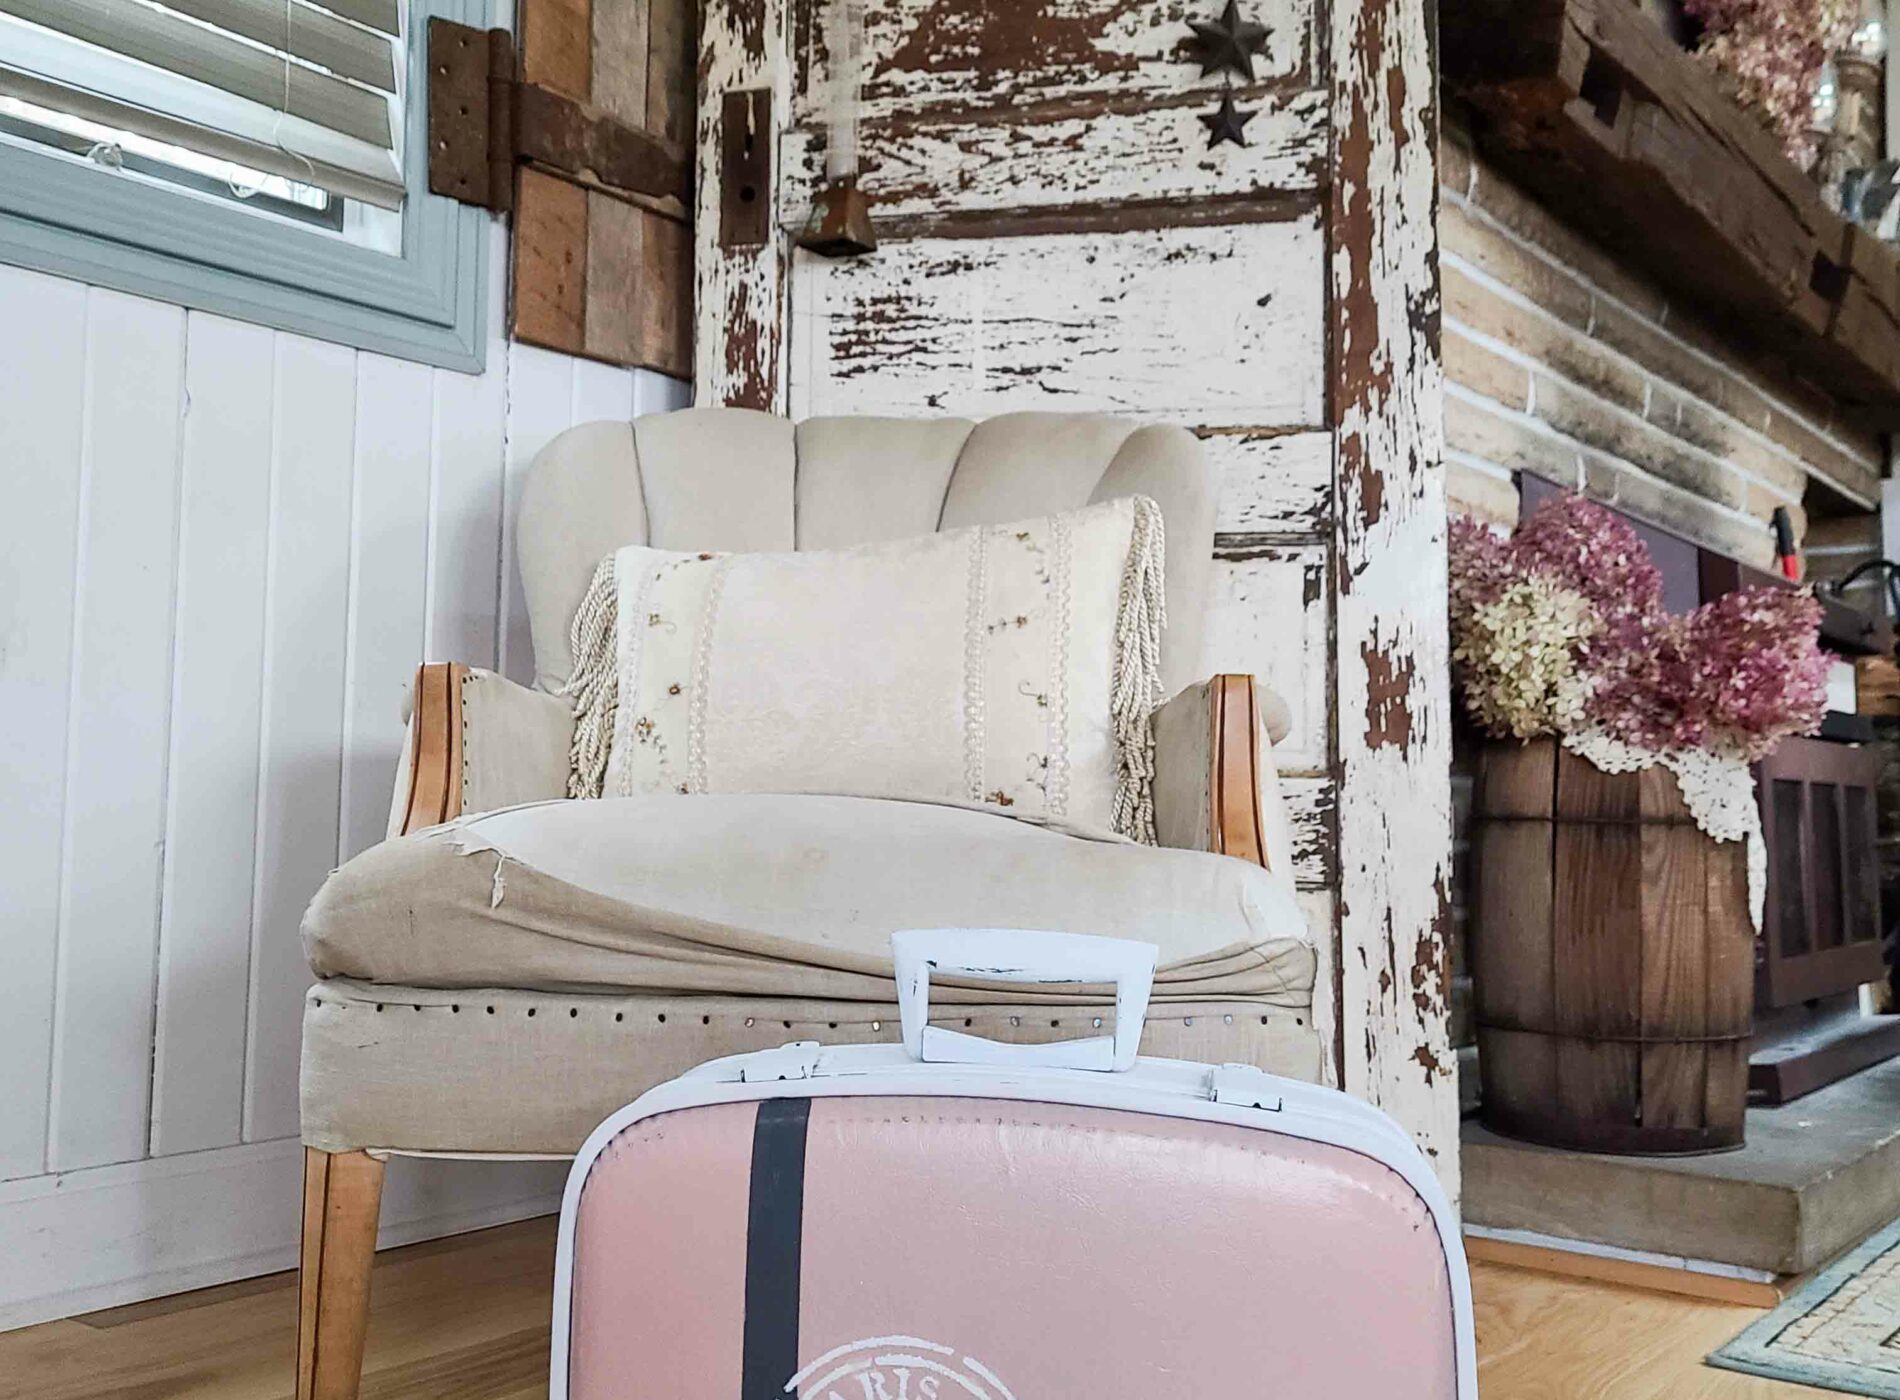 French Pink Vintage Suitcase available at Prodigal Pieces | shop.prodigalpieces.com #prodigalpieces